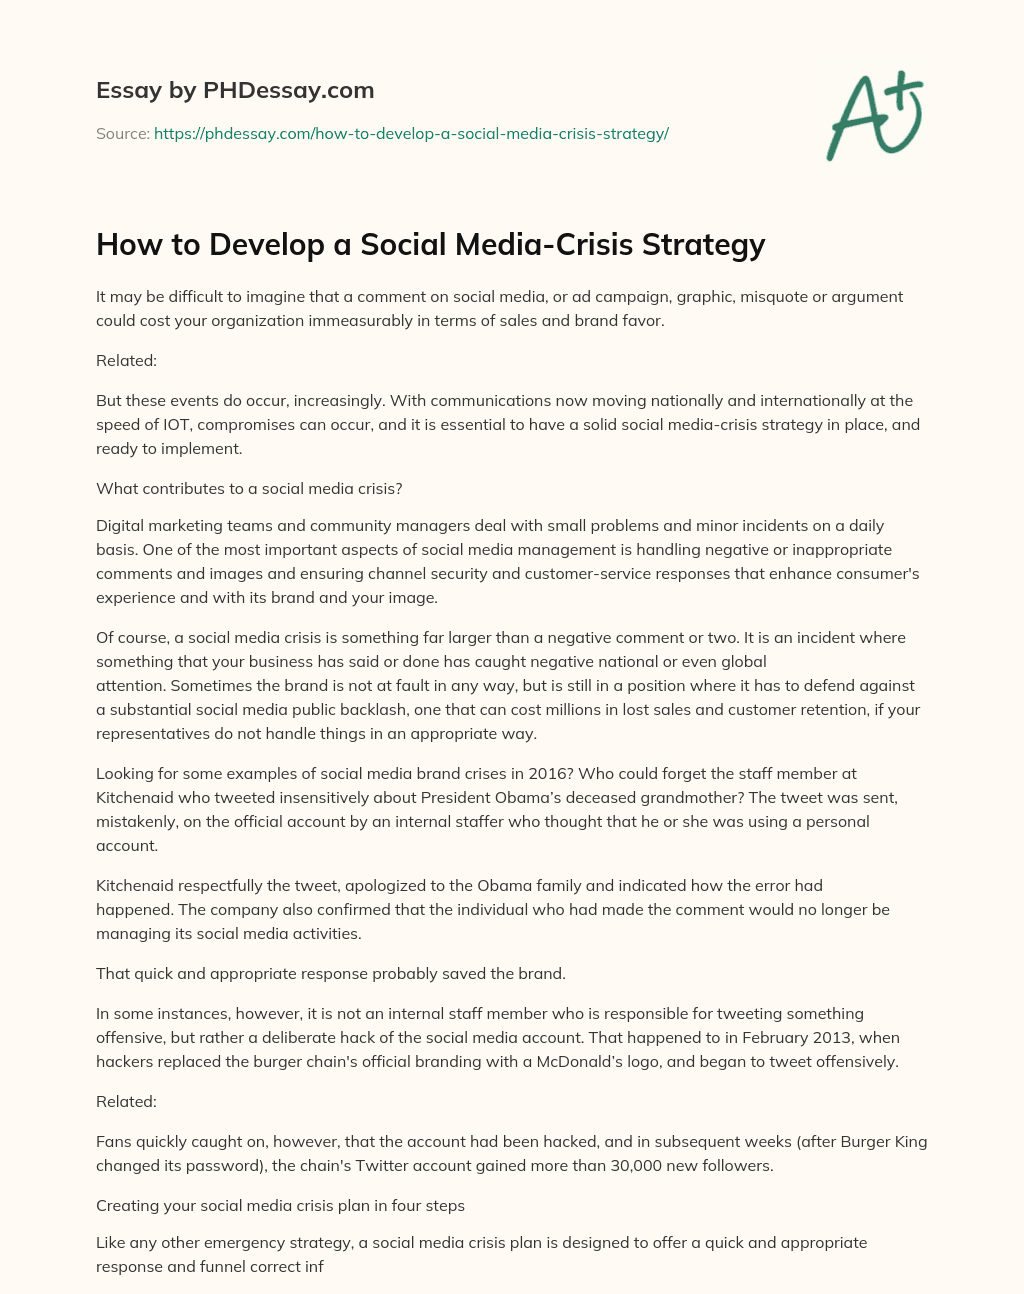 How to Develop a Social Media-Crisis Strategy essay